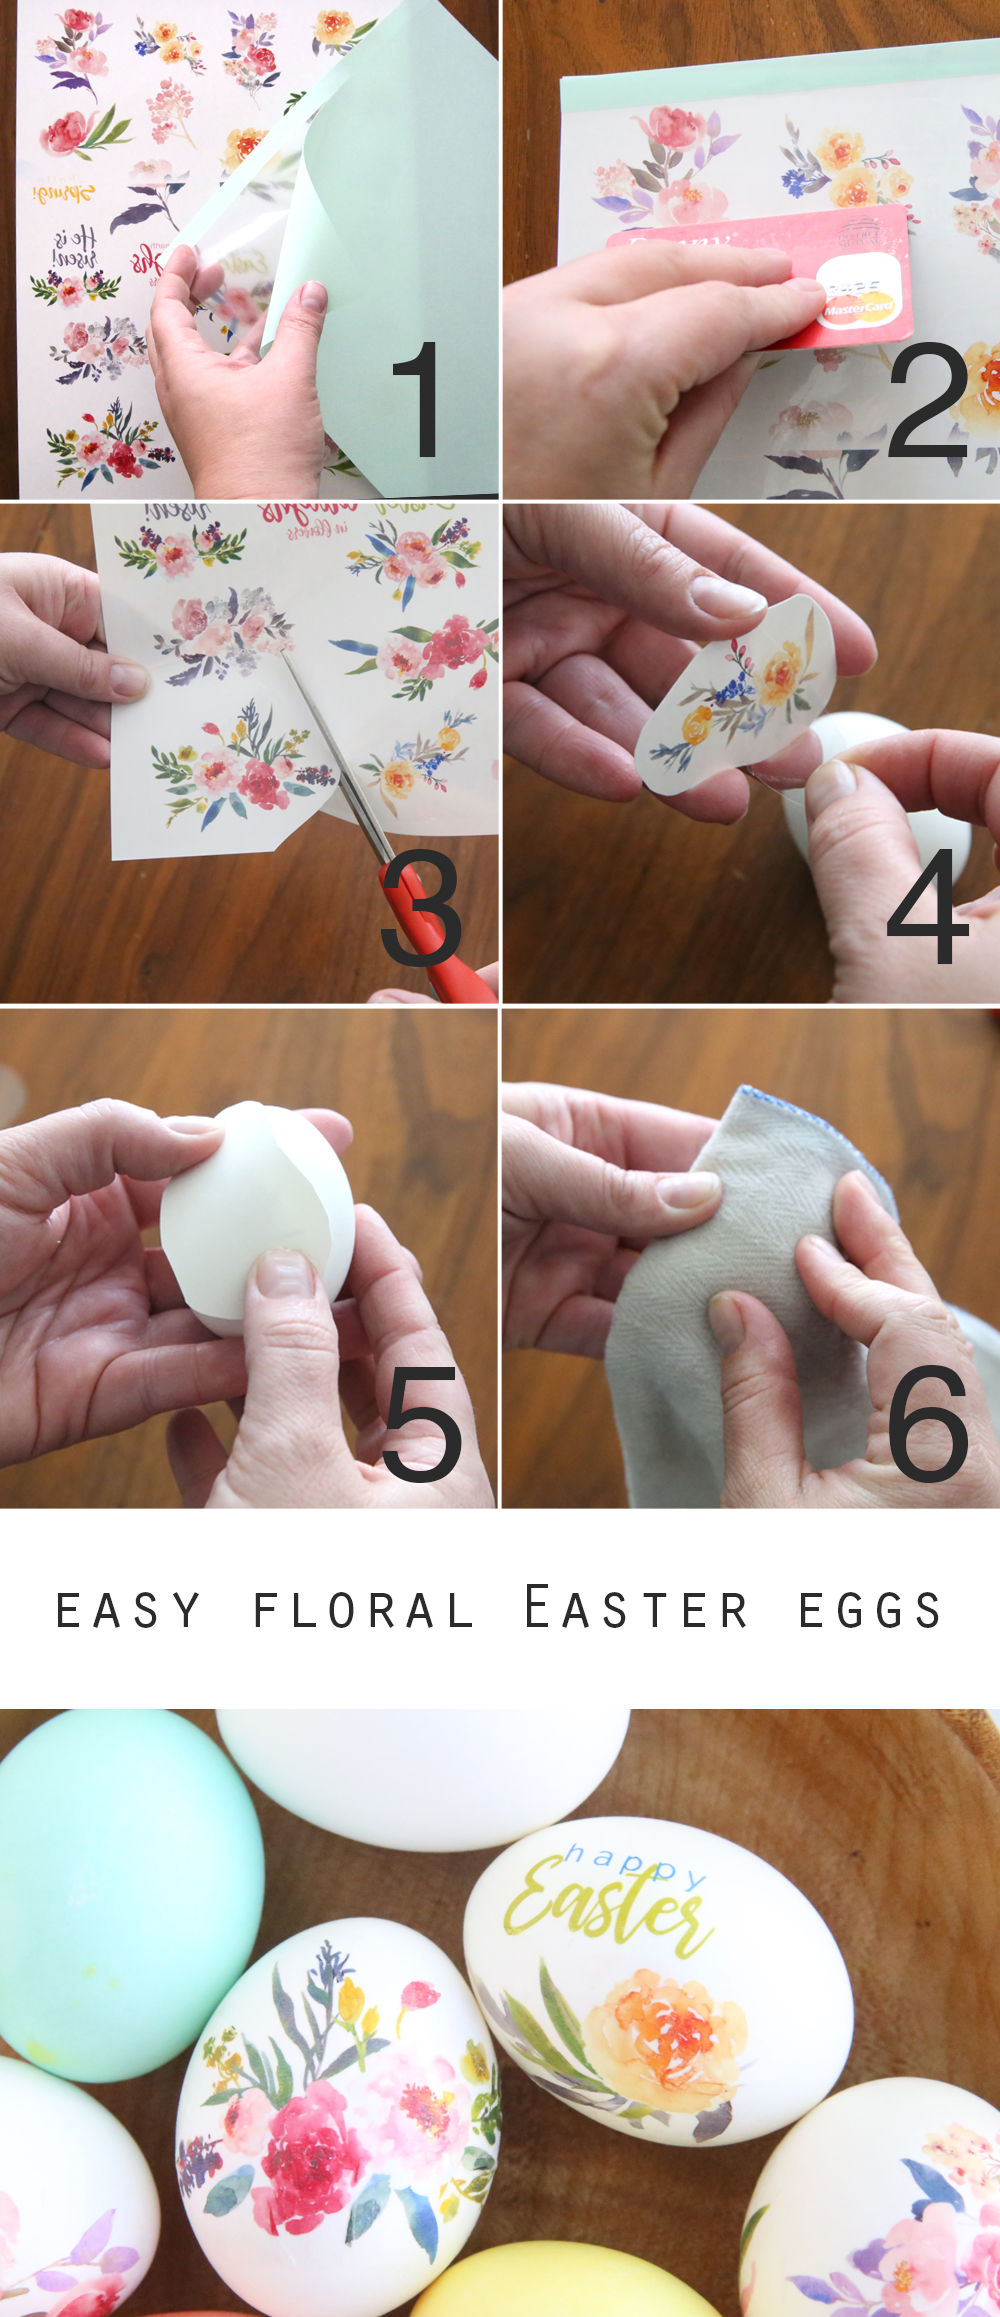 Applying floral temporary tattoos on eggs